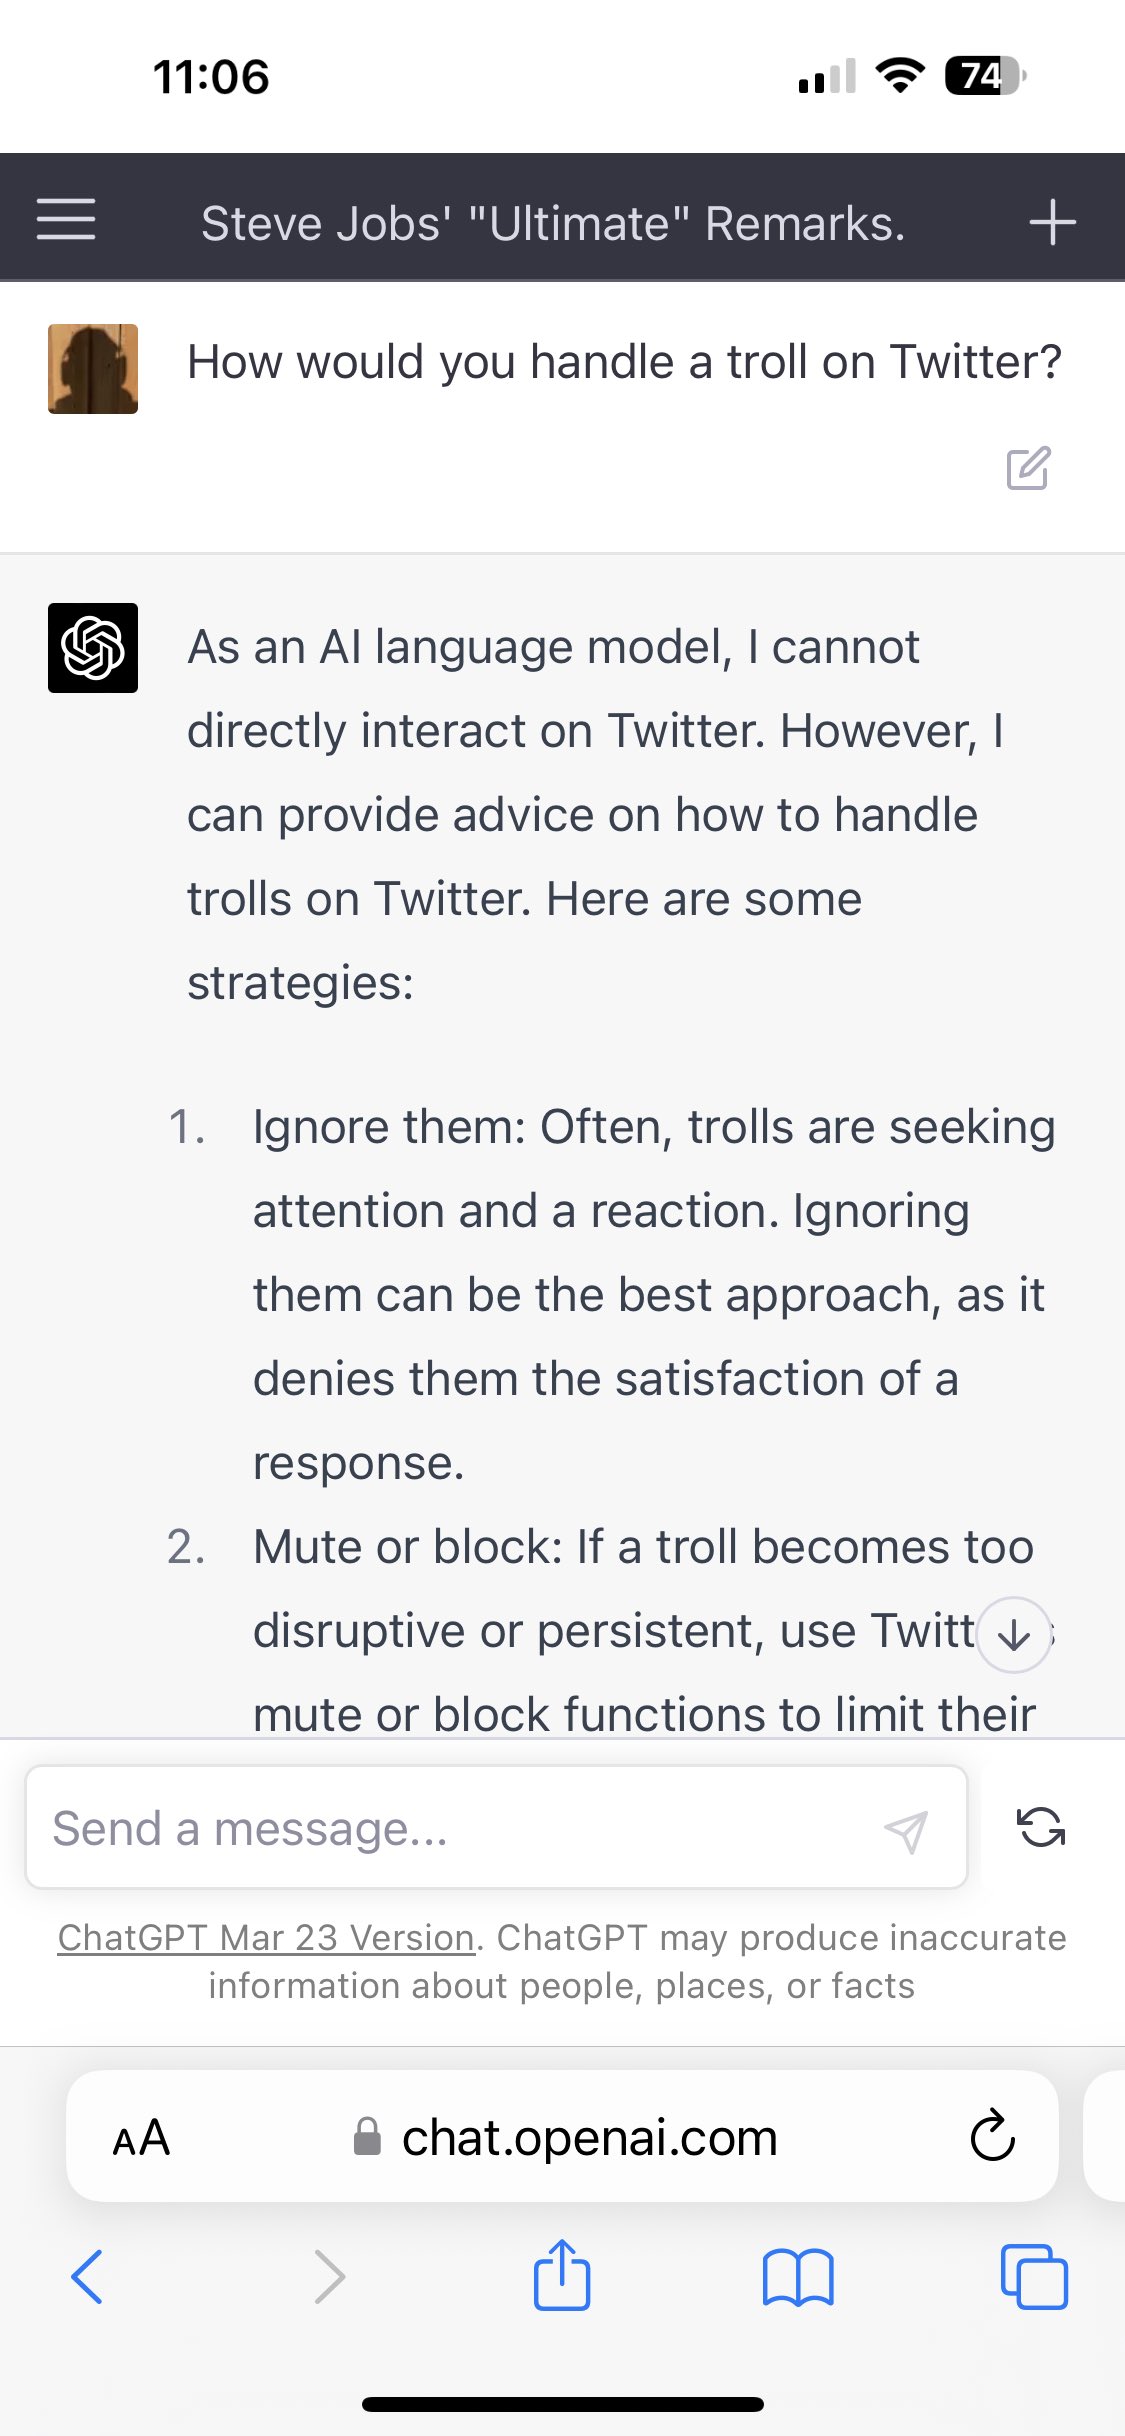 Trolling the trolls! How to handle them well :)